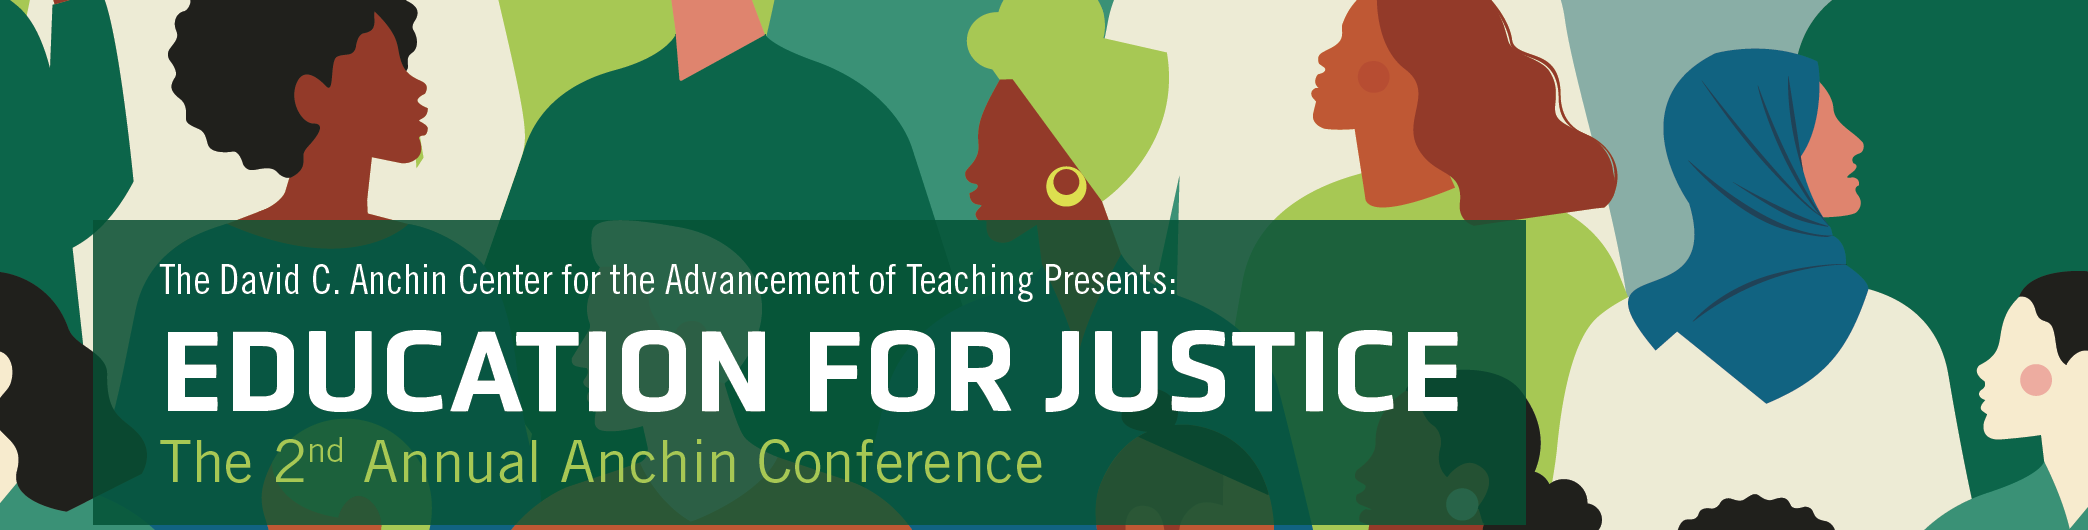 Education for Justice Conference